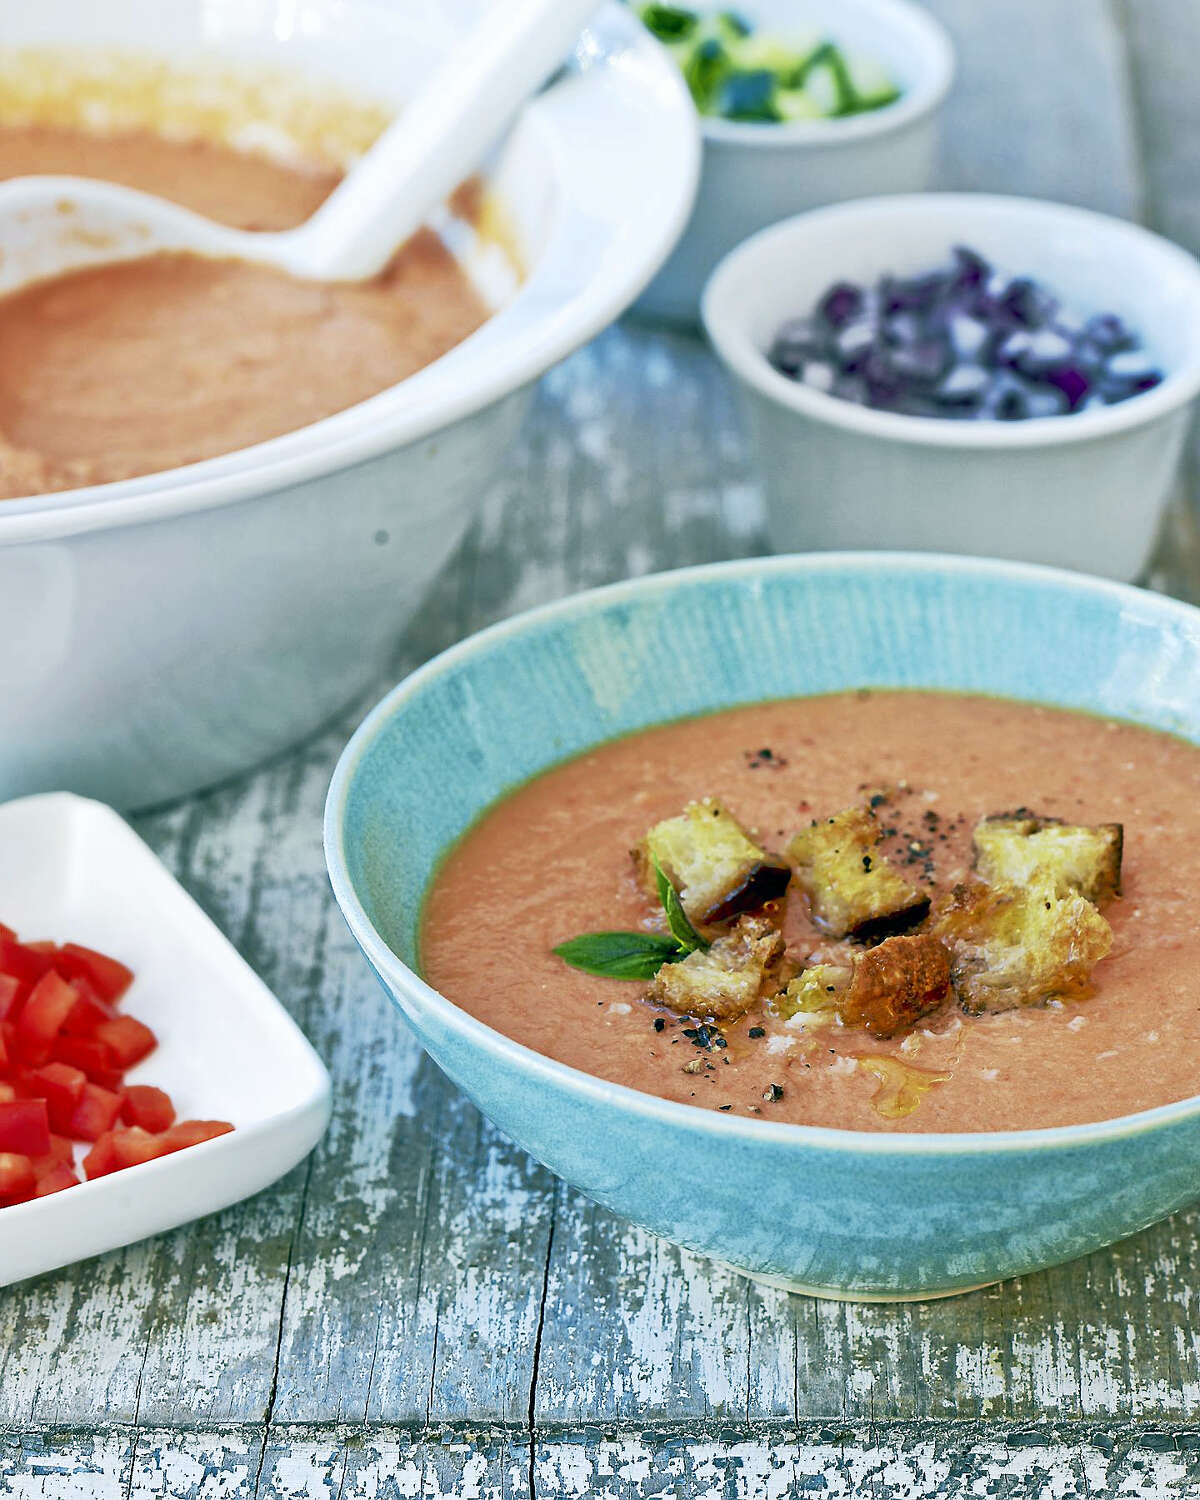 Seaside gazpacho with choose-your-own-toppings.